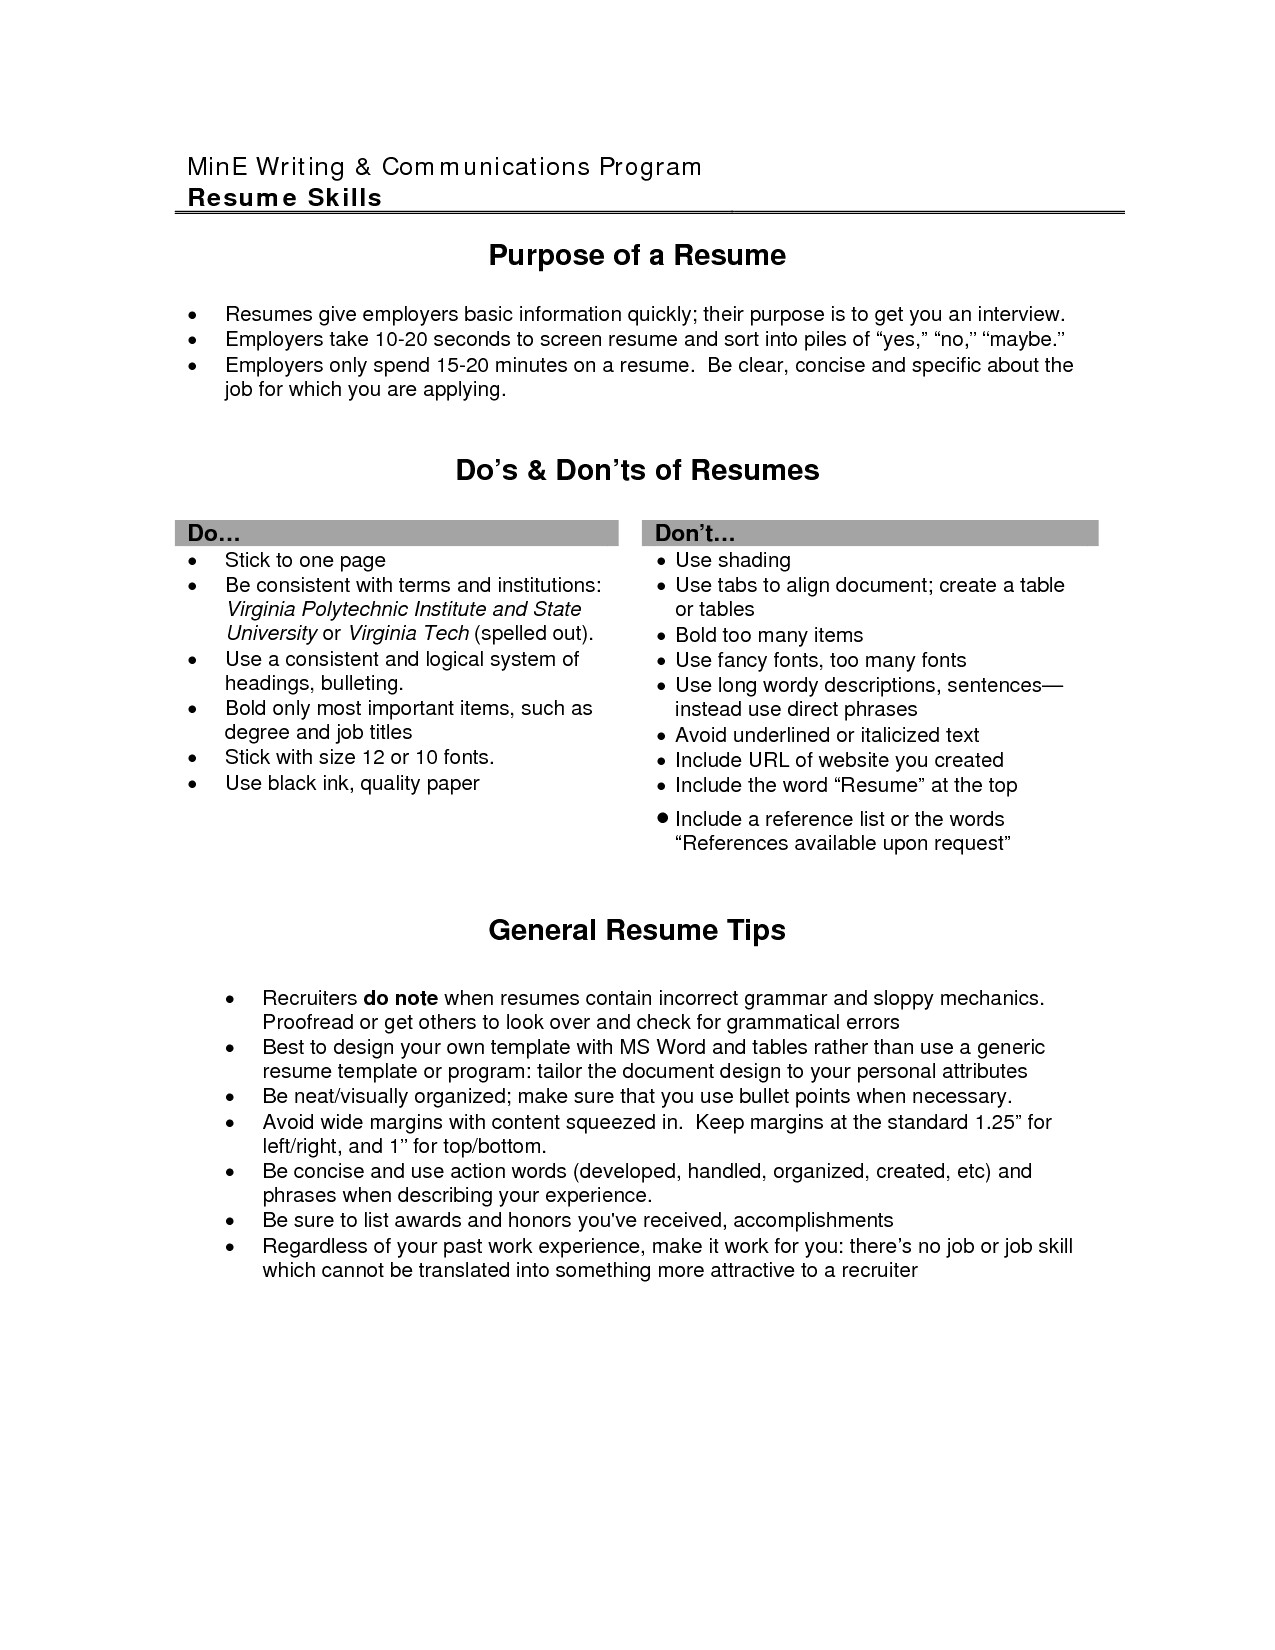 Resume Objective Examples  General Resume Objective Examples Elegant Samples Of 15 Basic Cmt